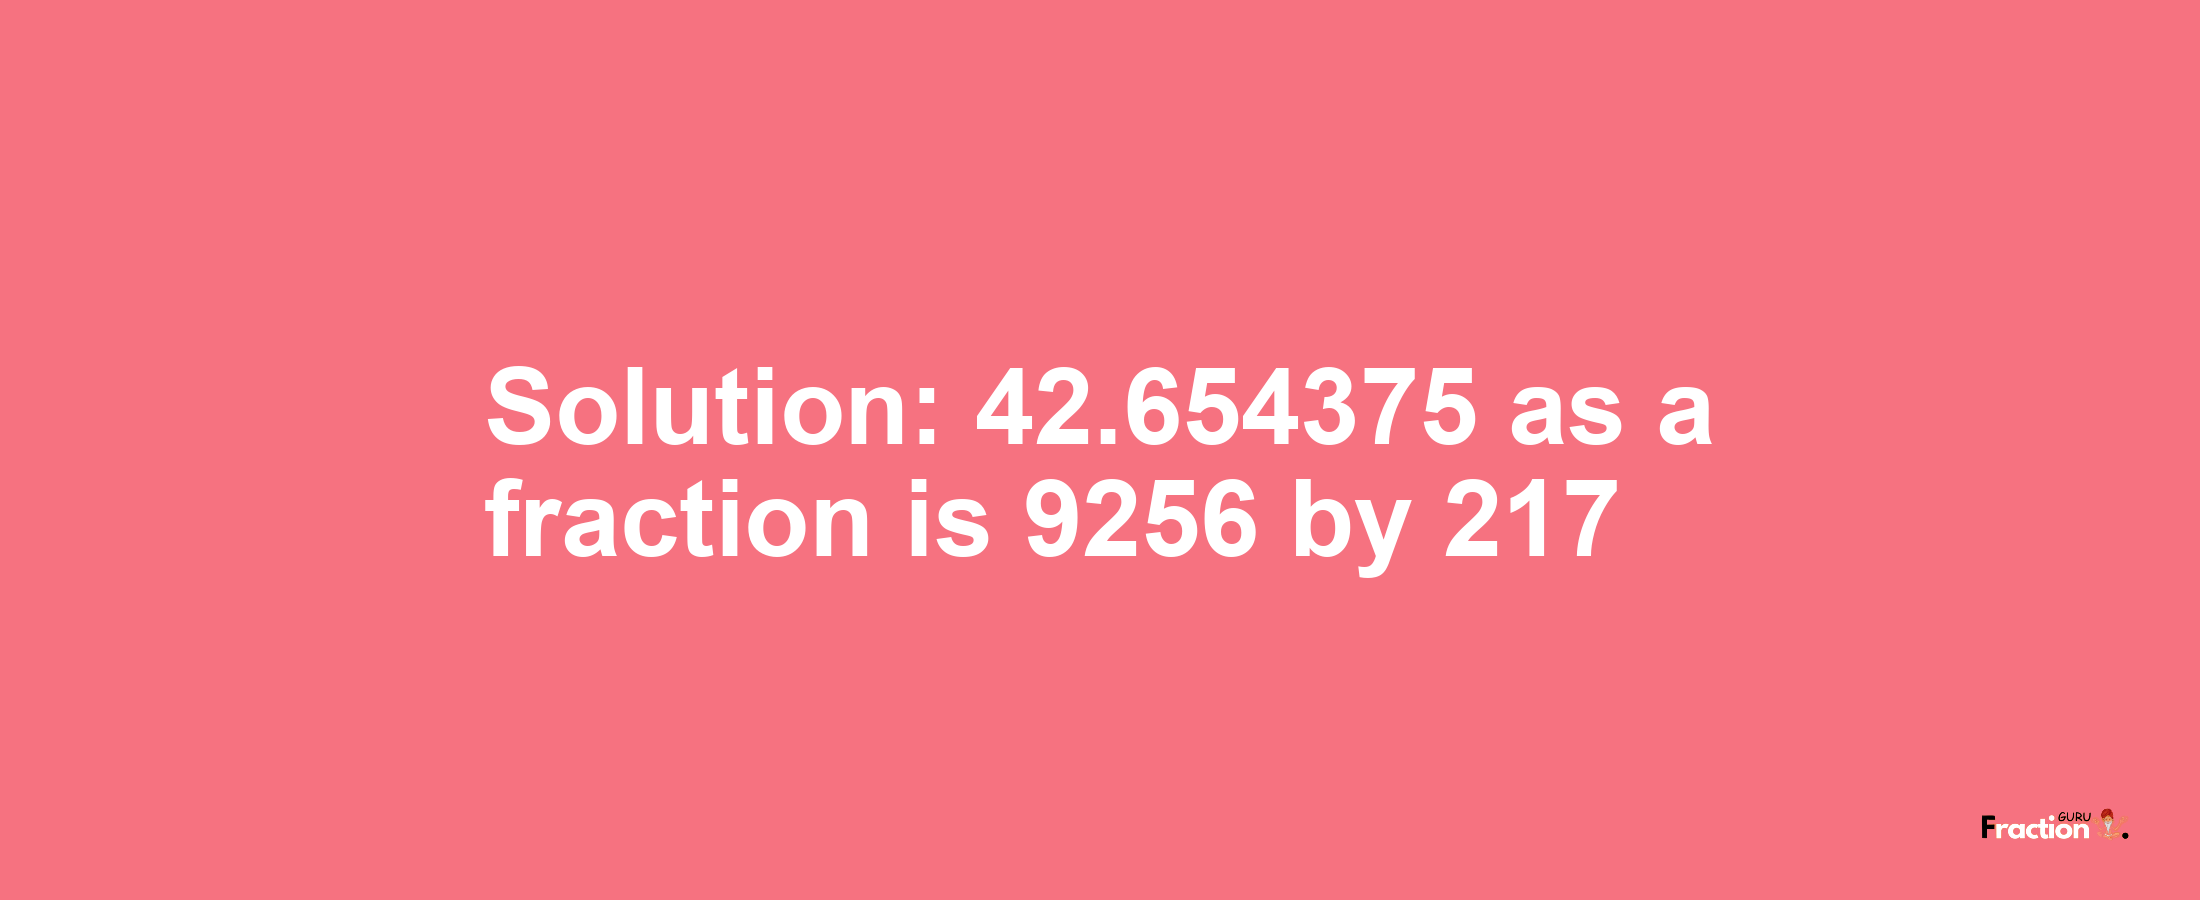 Solution:42.654375 as a fraction is 9256/217